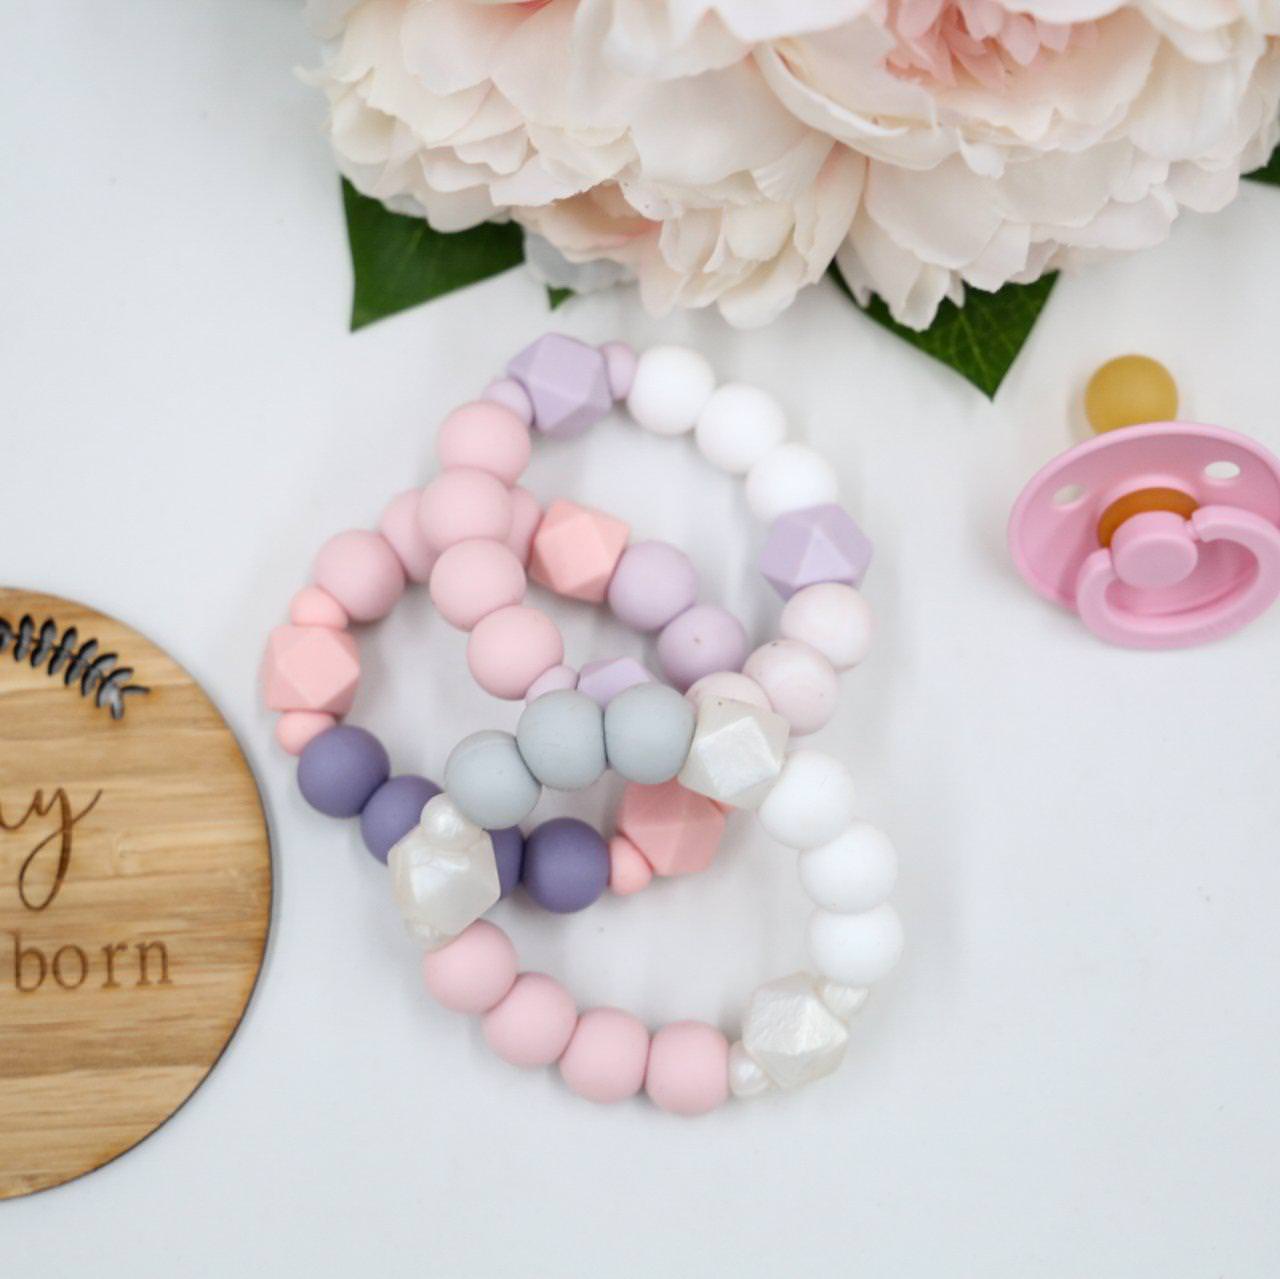 Triple Toned Silicone Teether